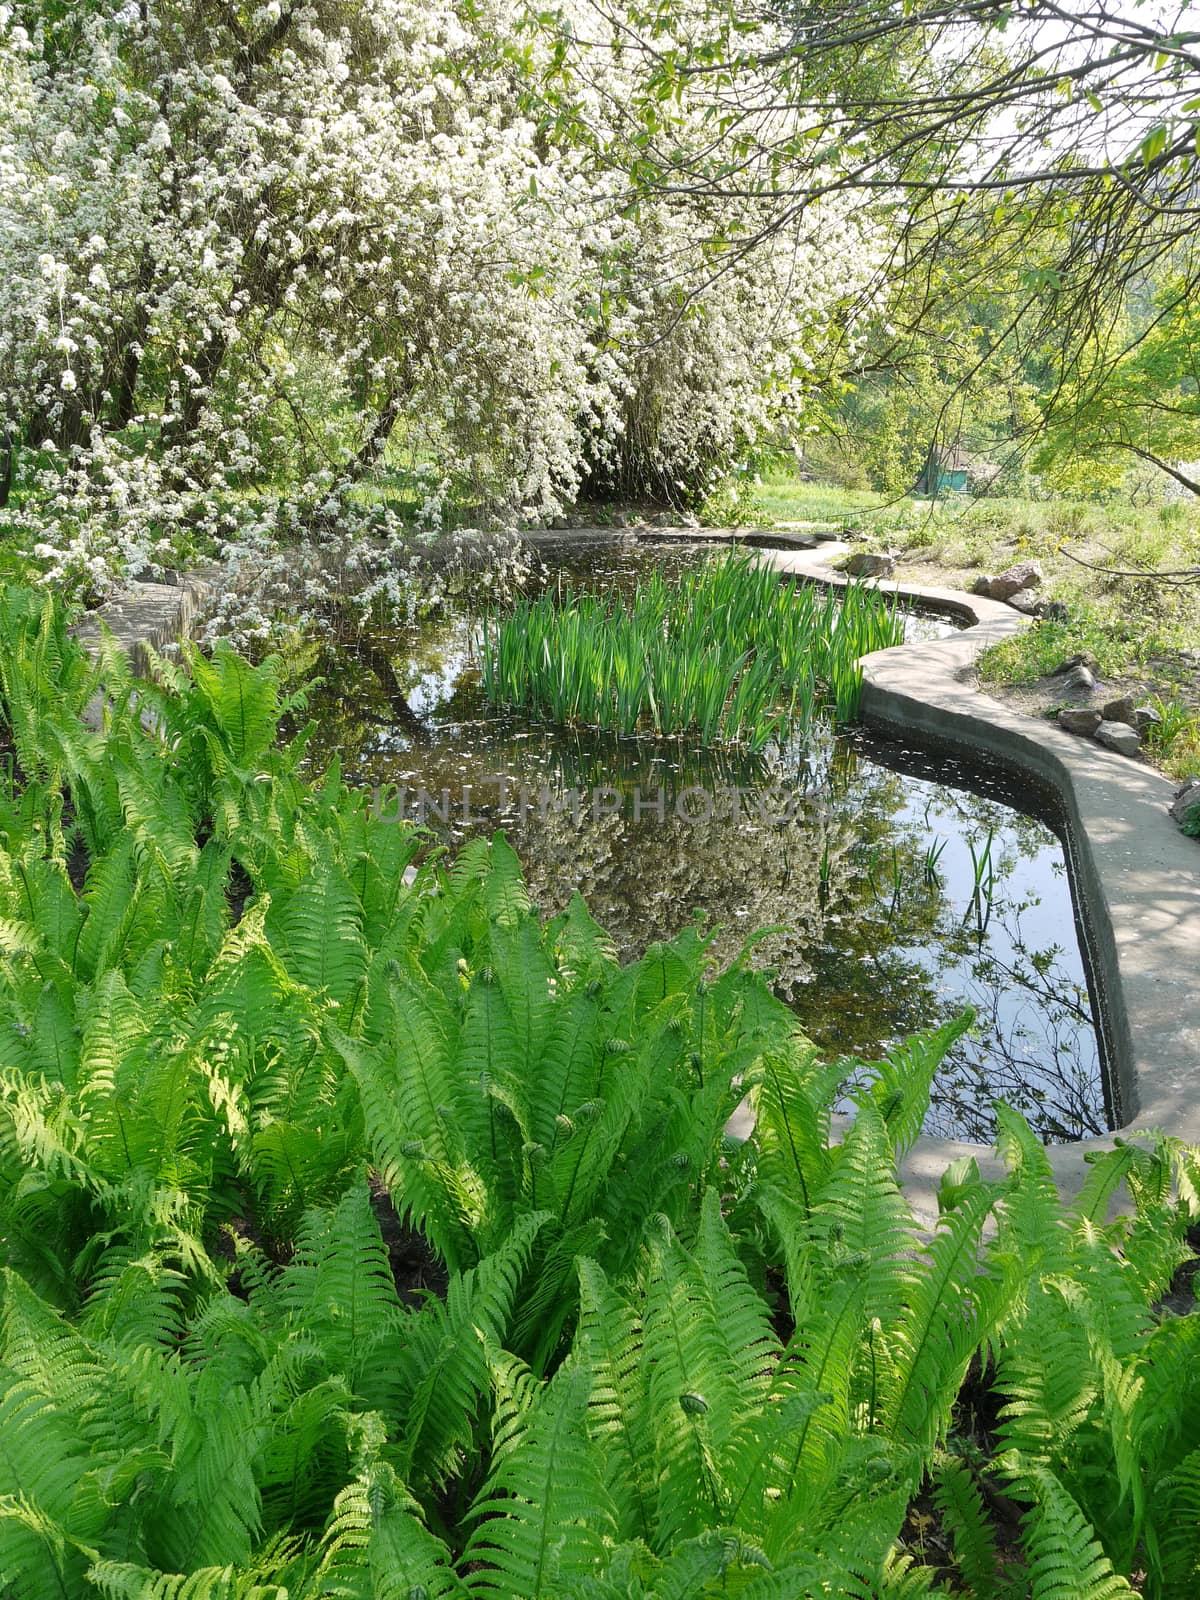 A small pond with a concrete path that goes through it. Next to the white lilac blossoms